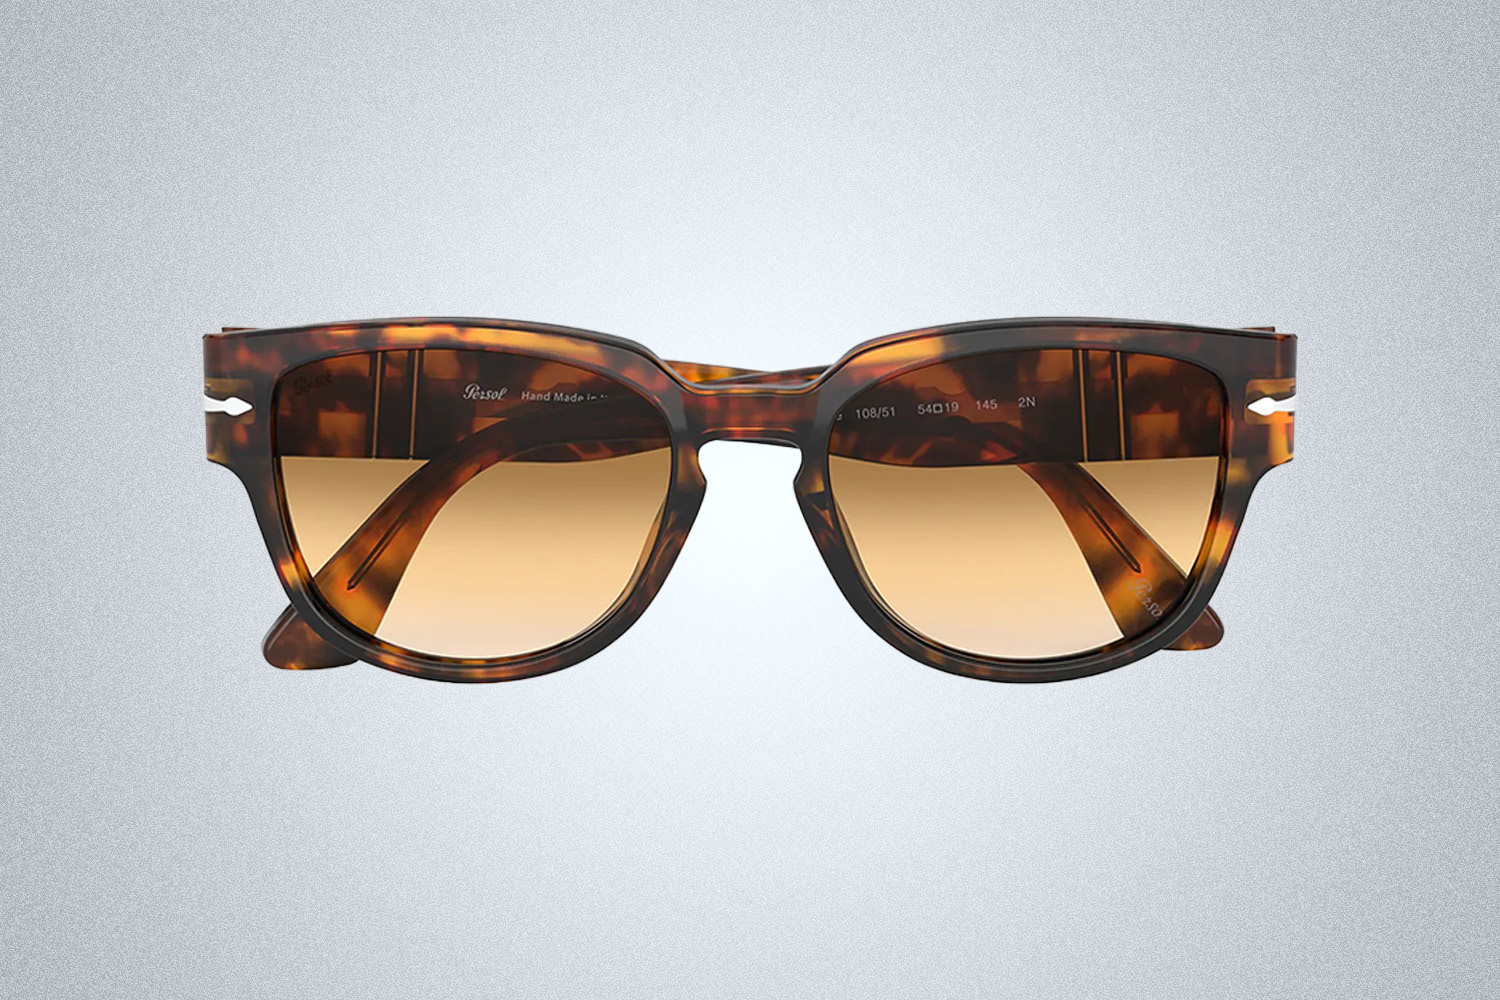 Tortoiseshell square Persol sunglasses on a grey background